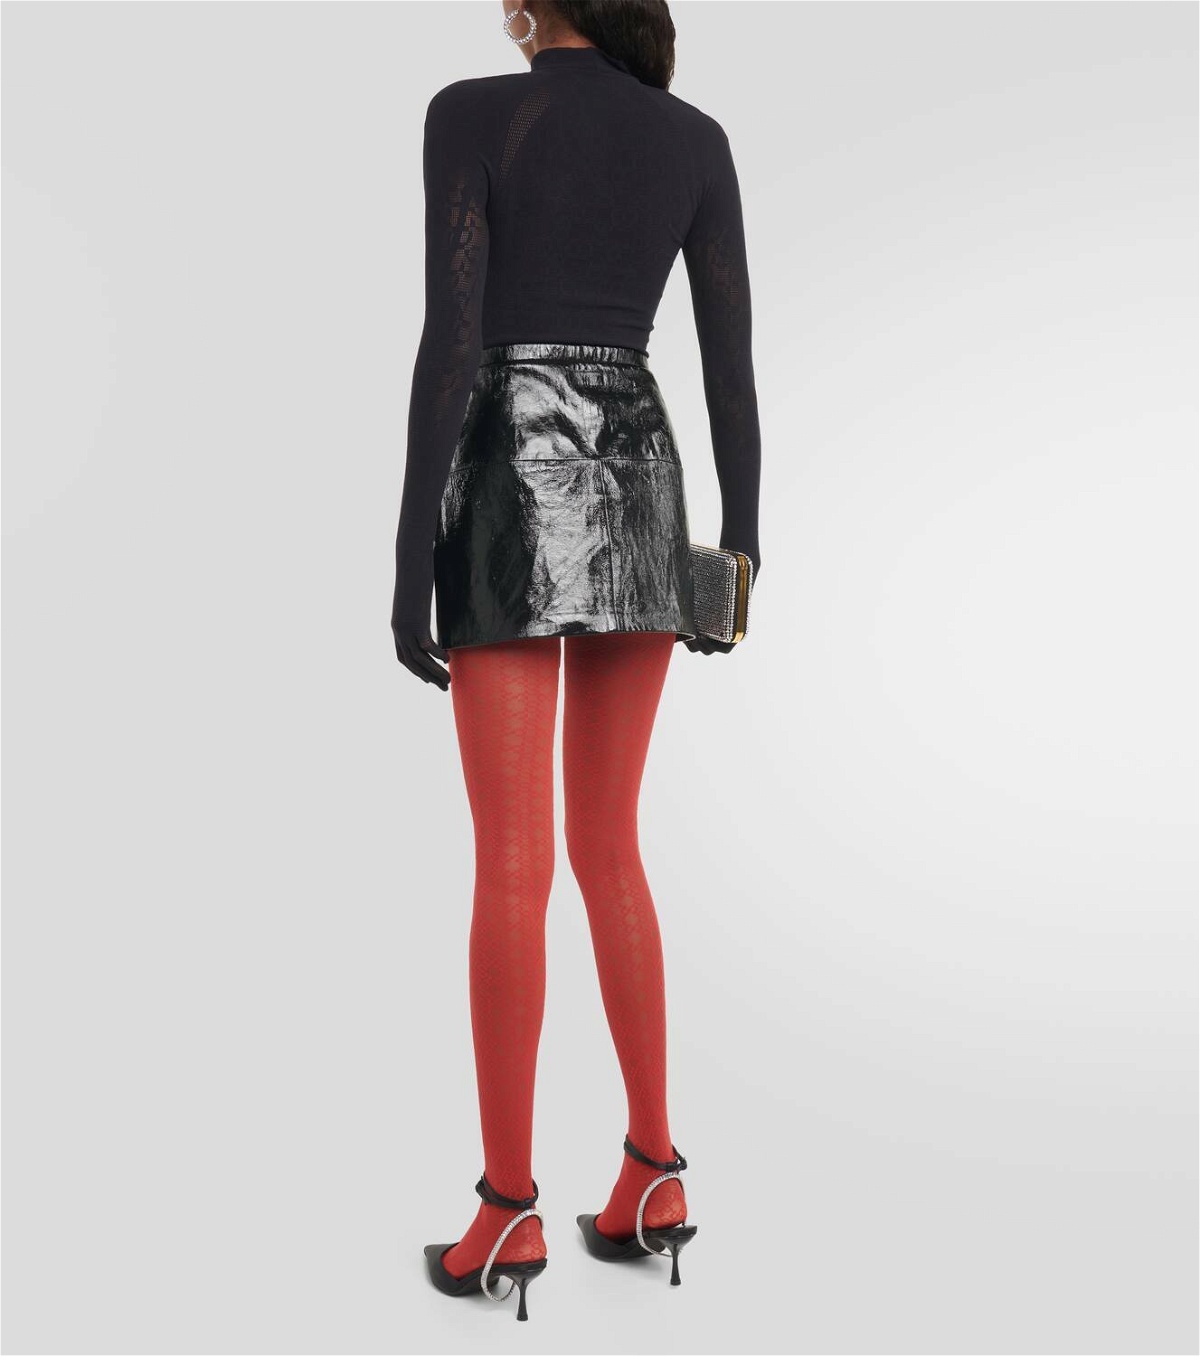 Wolford x Simkhai Intricate Sheer tights Wolford